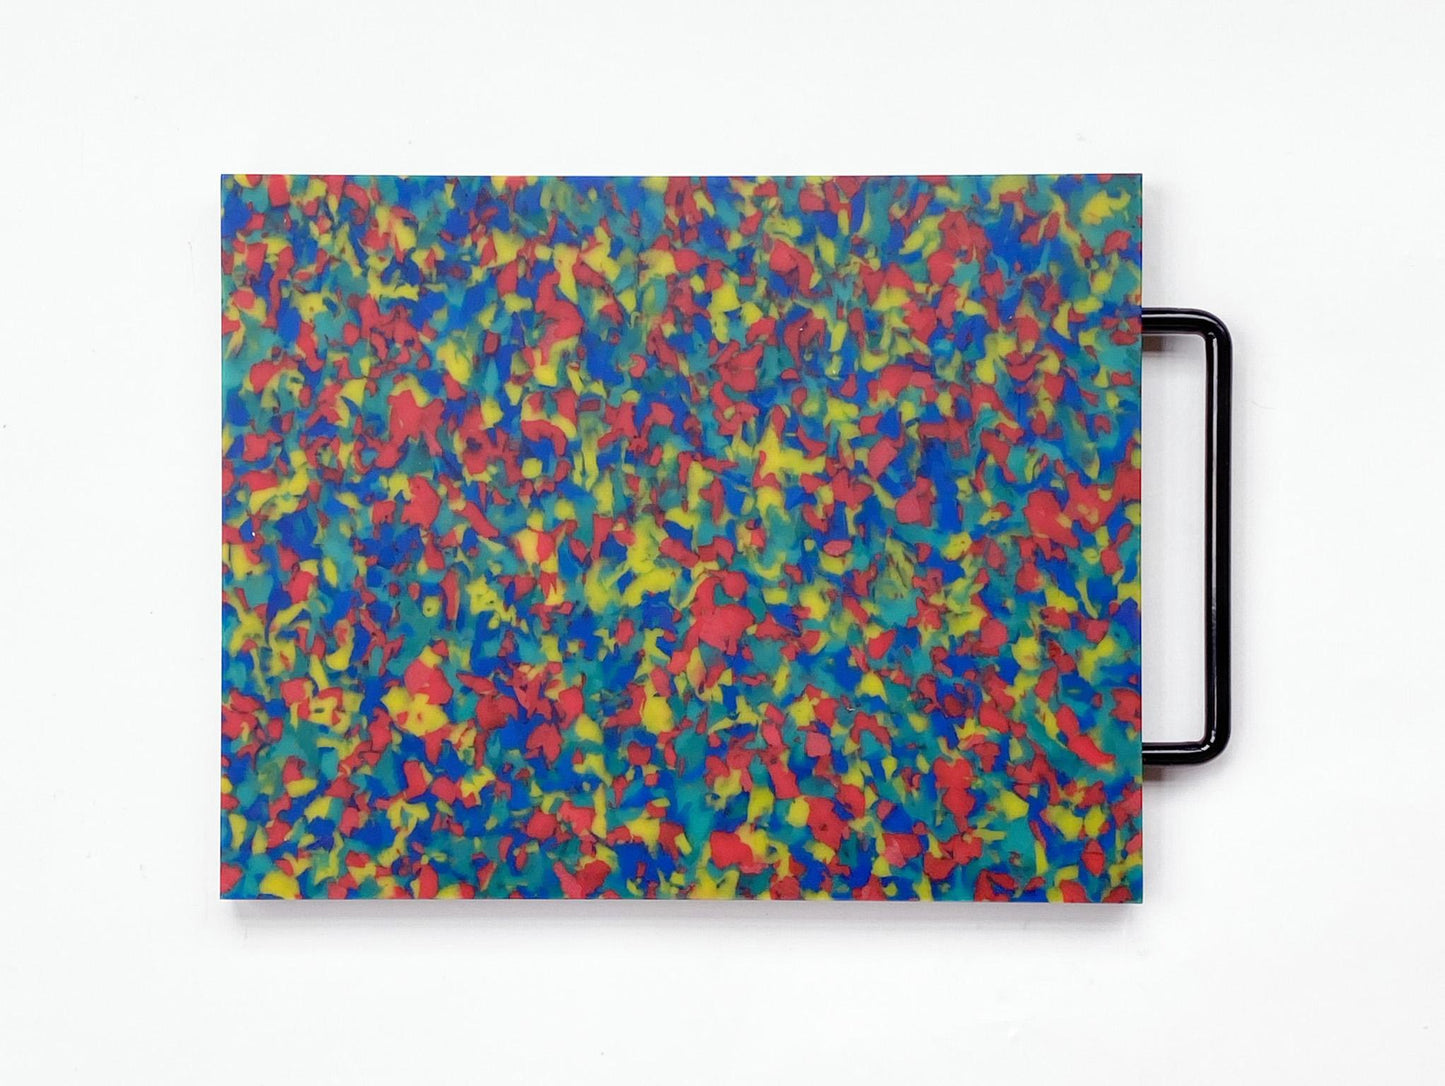 Rainbow cutting board that looks majority blue but has primary color confetti throughout. Handle is black. 